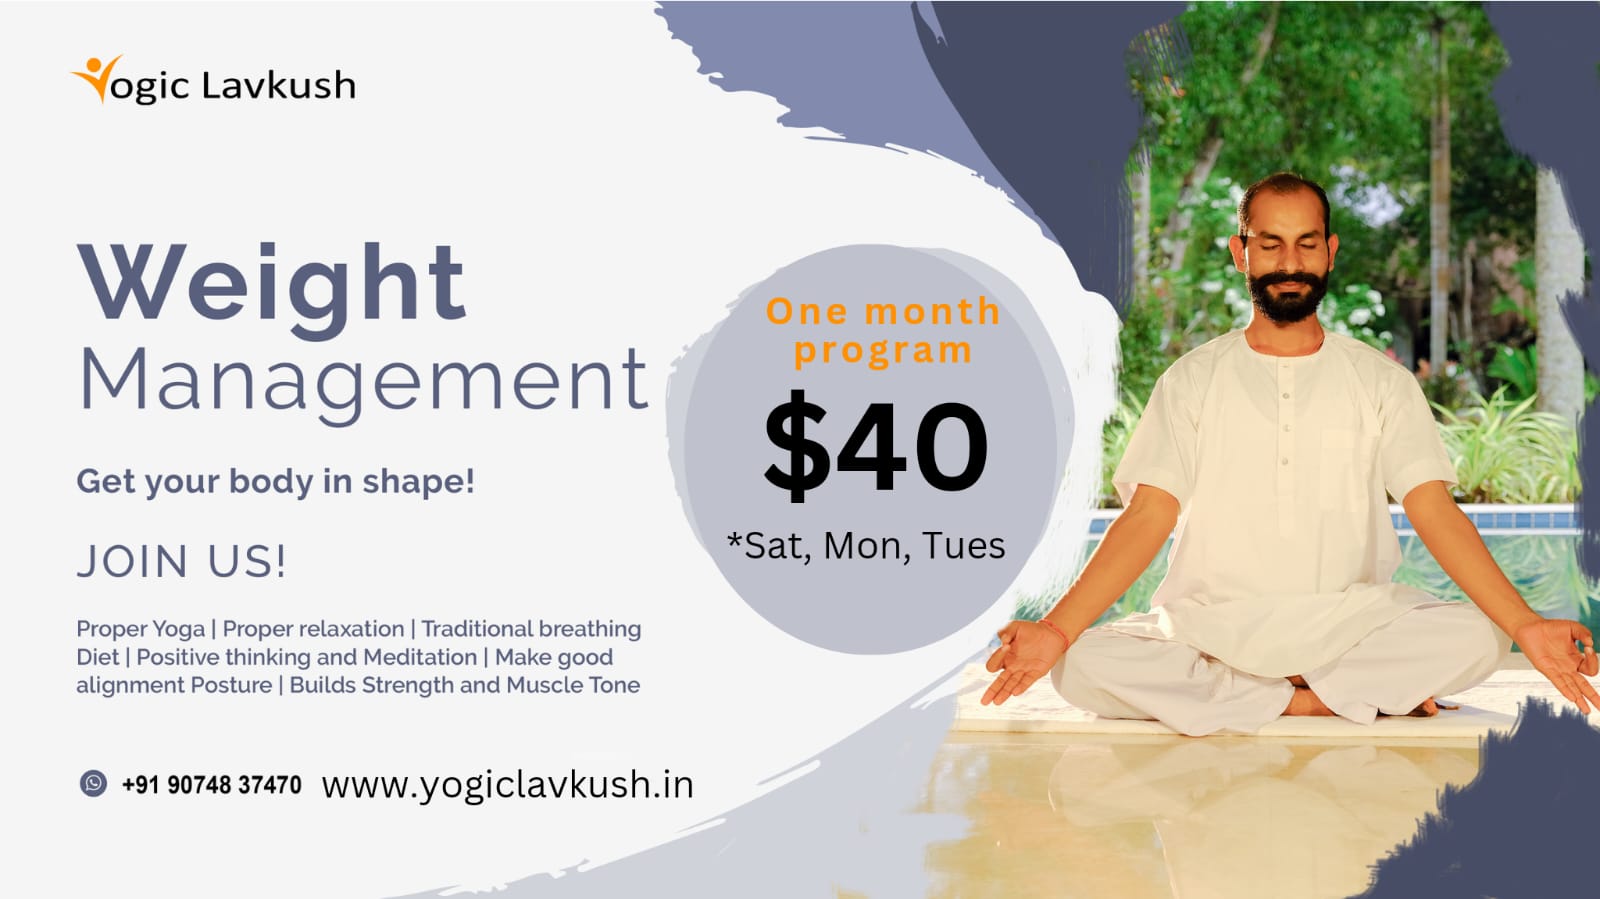 Achieve Weight Management Through Online Yoga Classes with Yogiclavkush